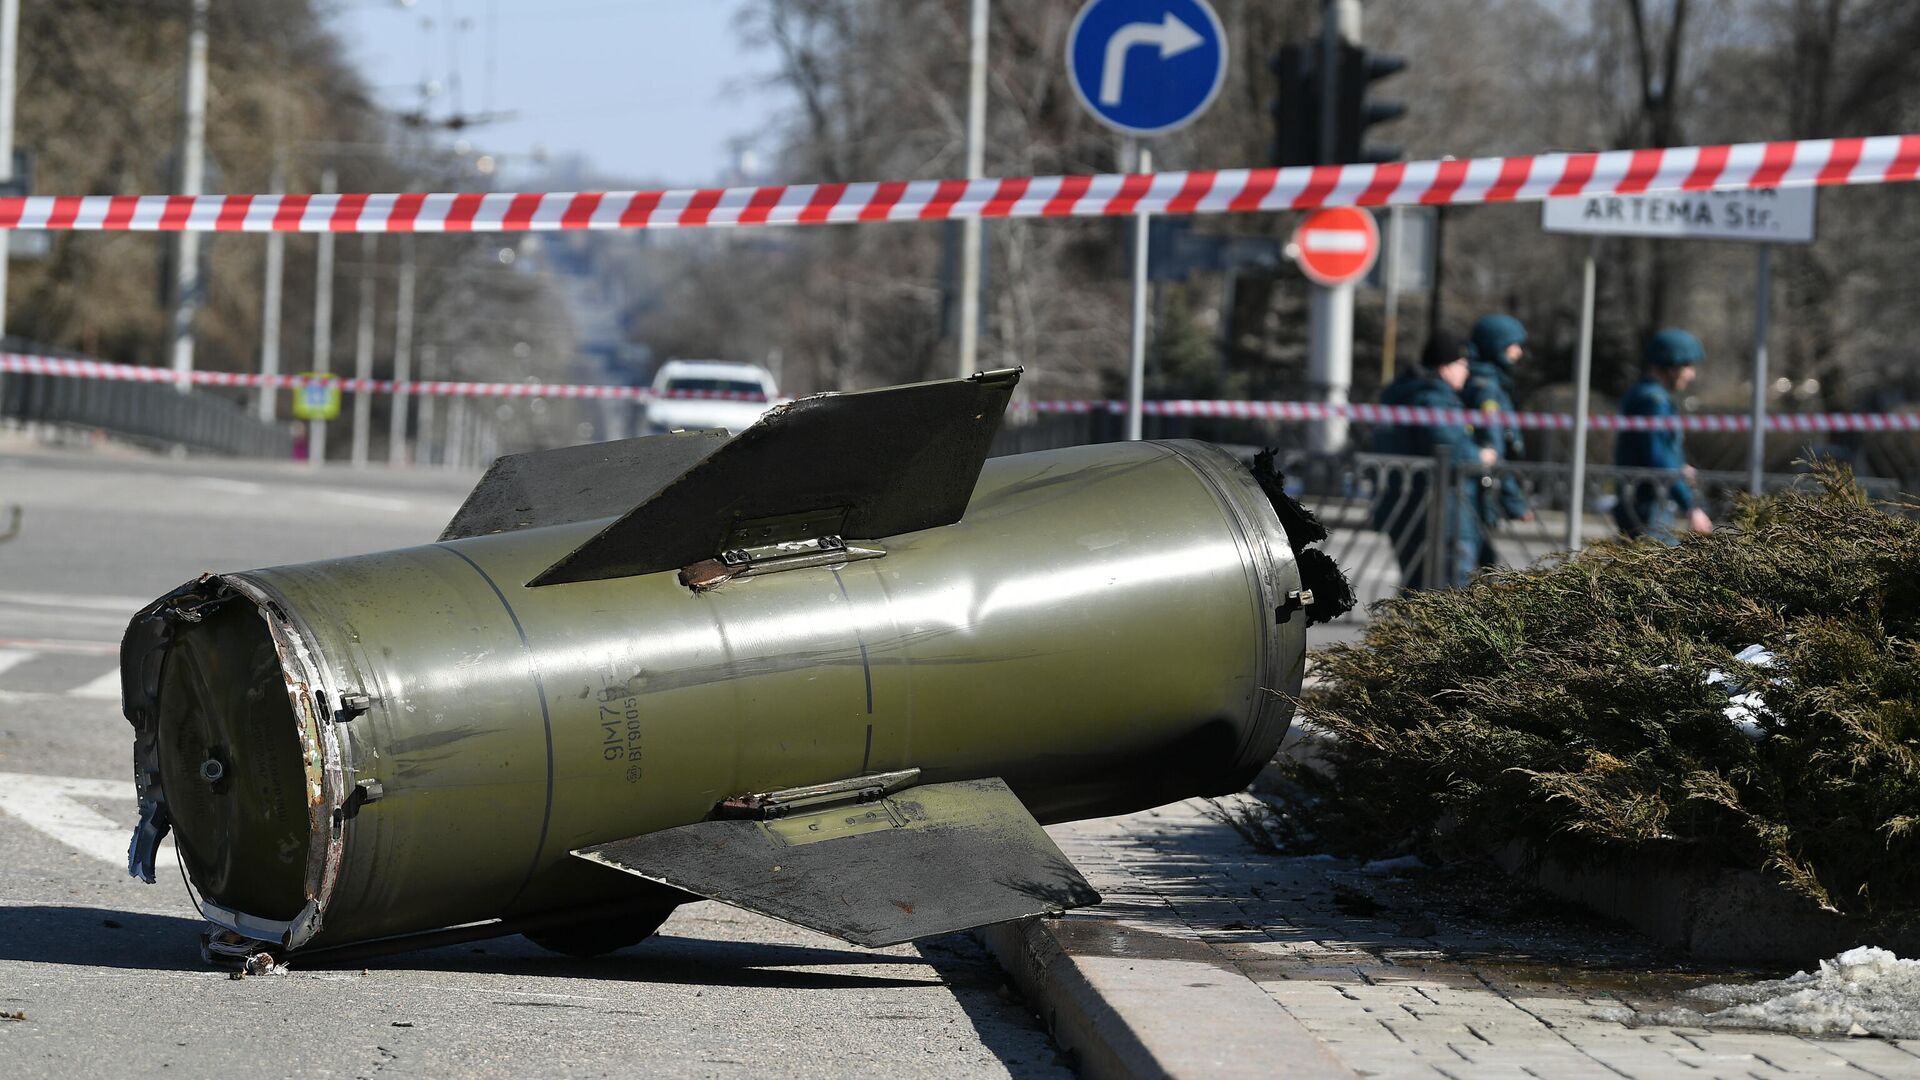 A fragment of an Ukrainian Tochka-U missile which had been shot down near the Government House in the city center during a recent shelling is pictured in Donetsk, Donetsk People's Republic. - Sputnik International, 1920, 18.03.2022